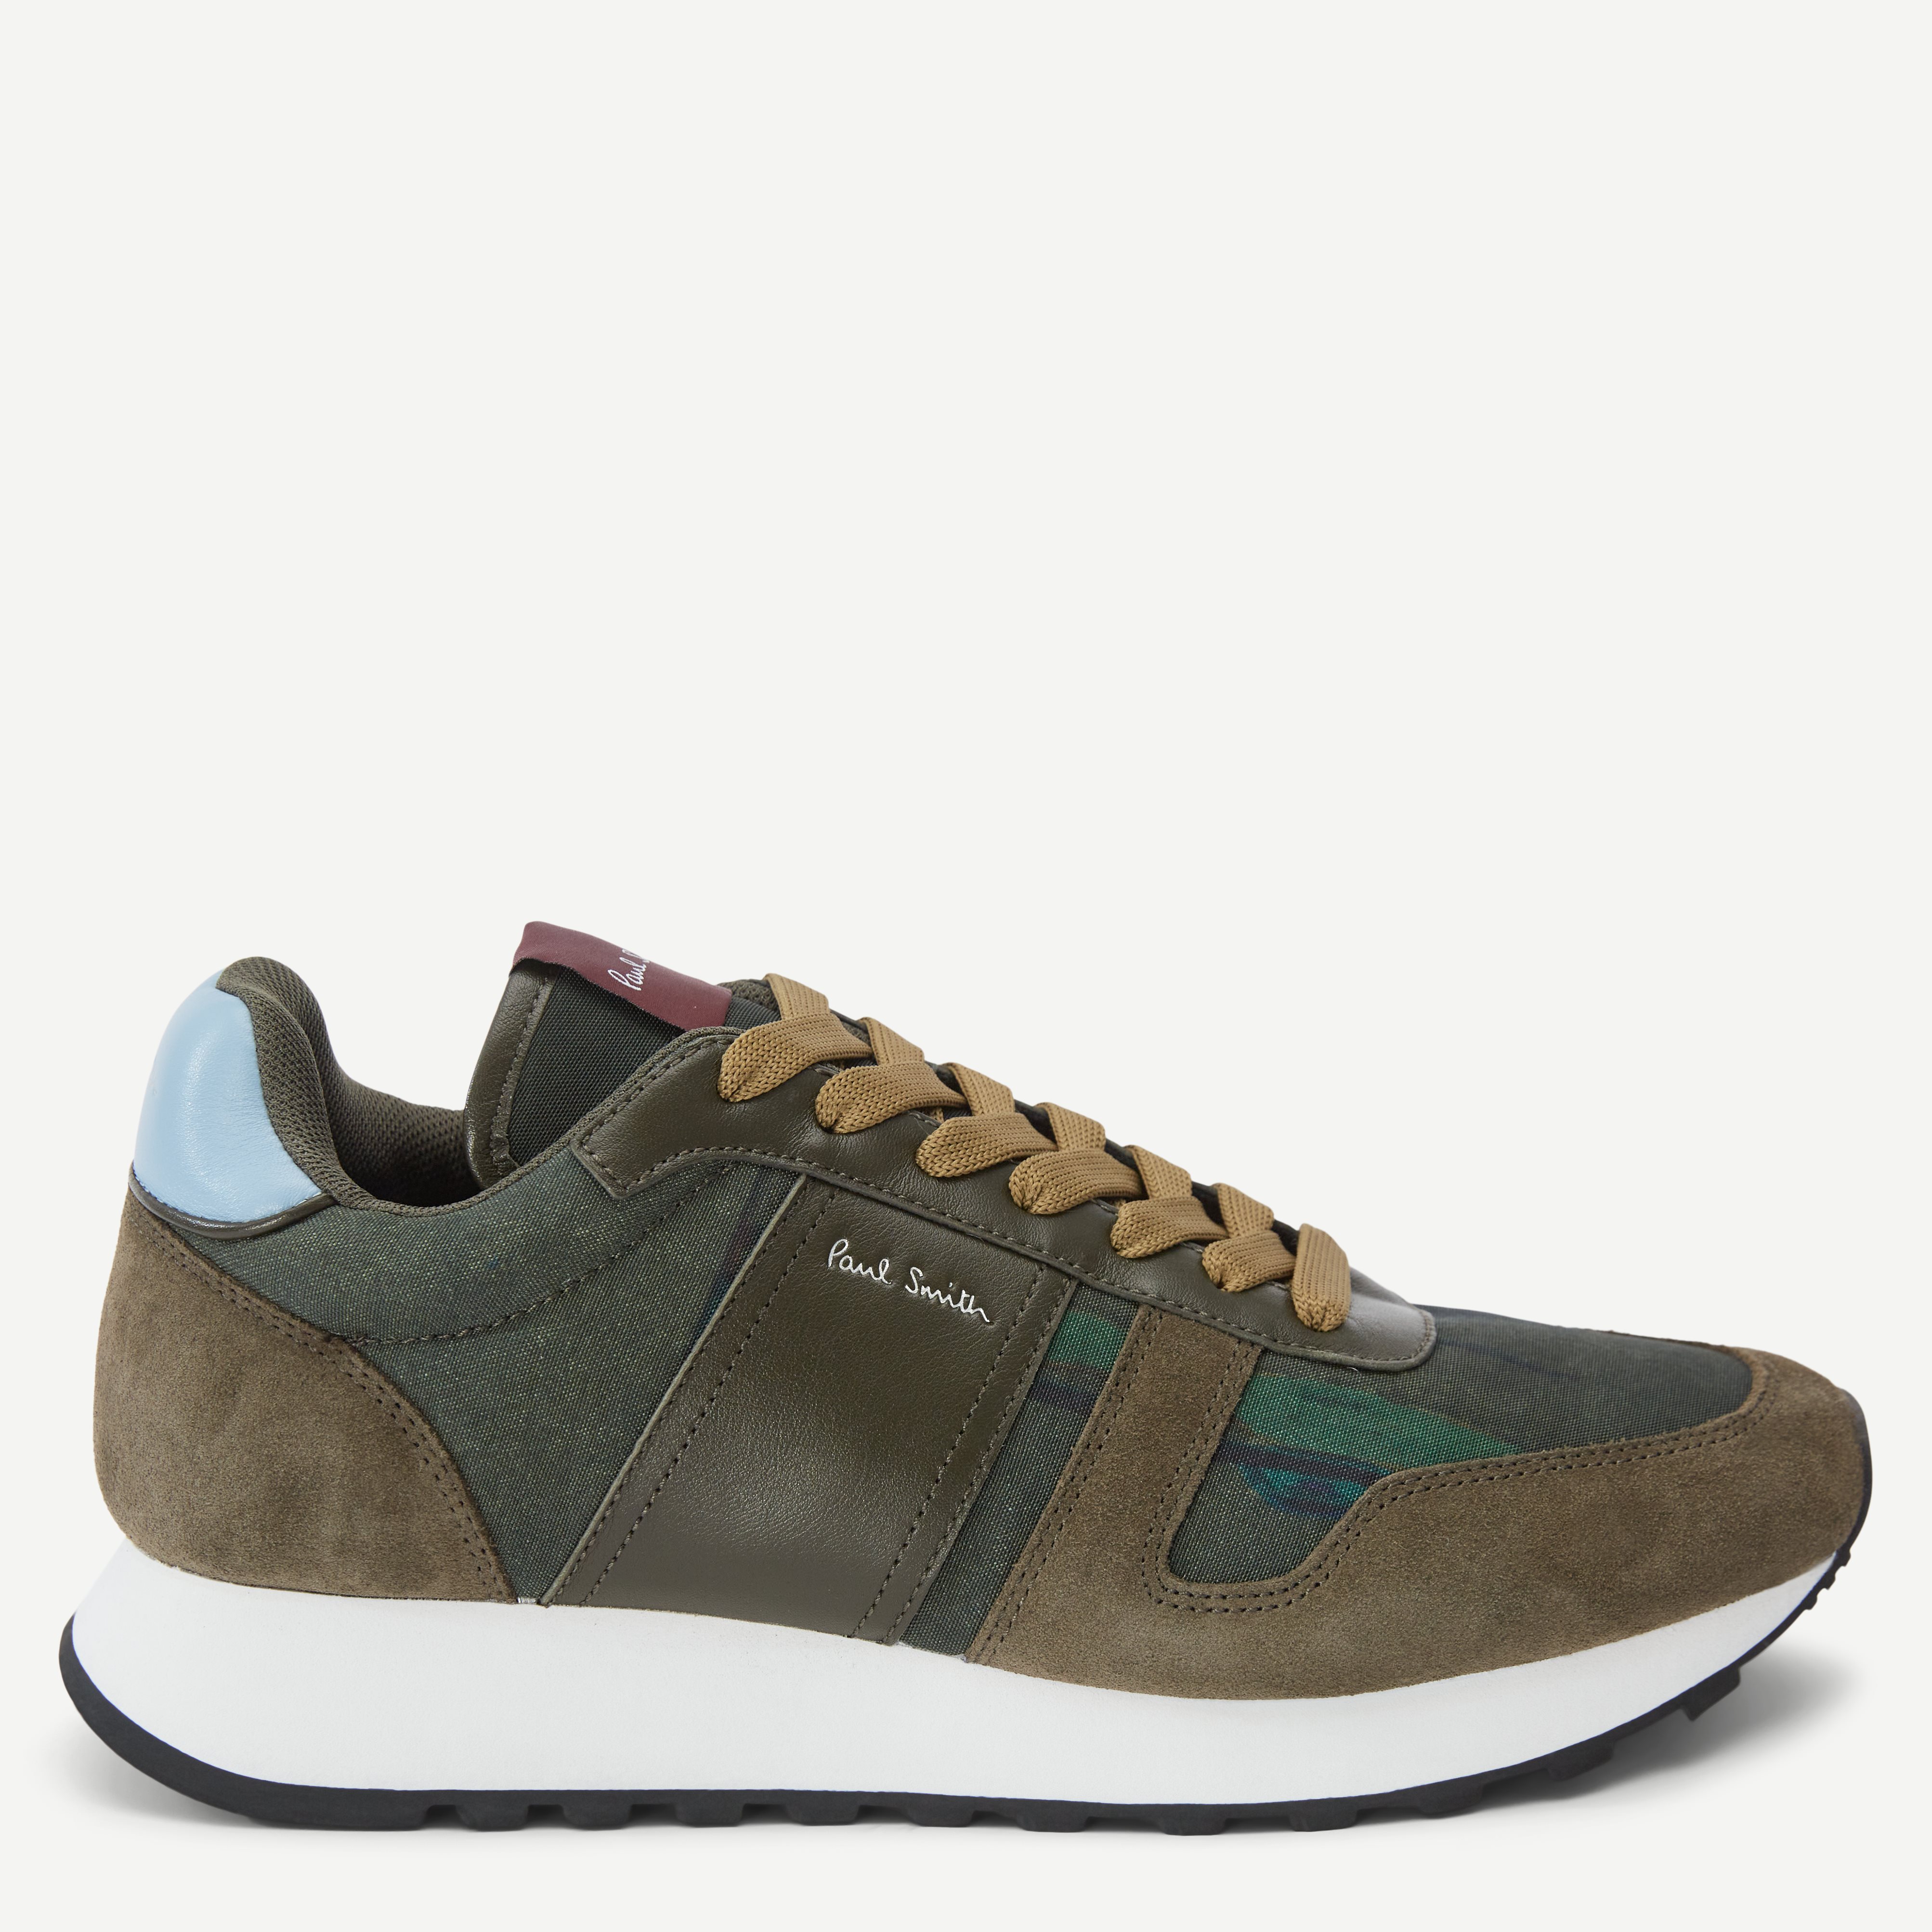 Paul Smith Shoes Shoes EIG08-JSUE Army